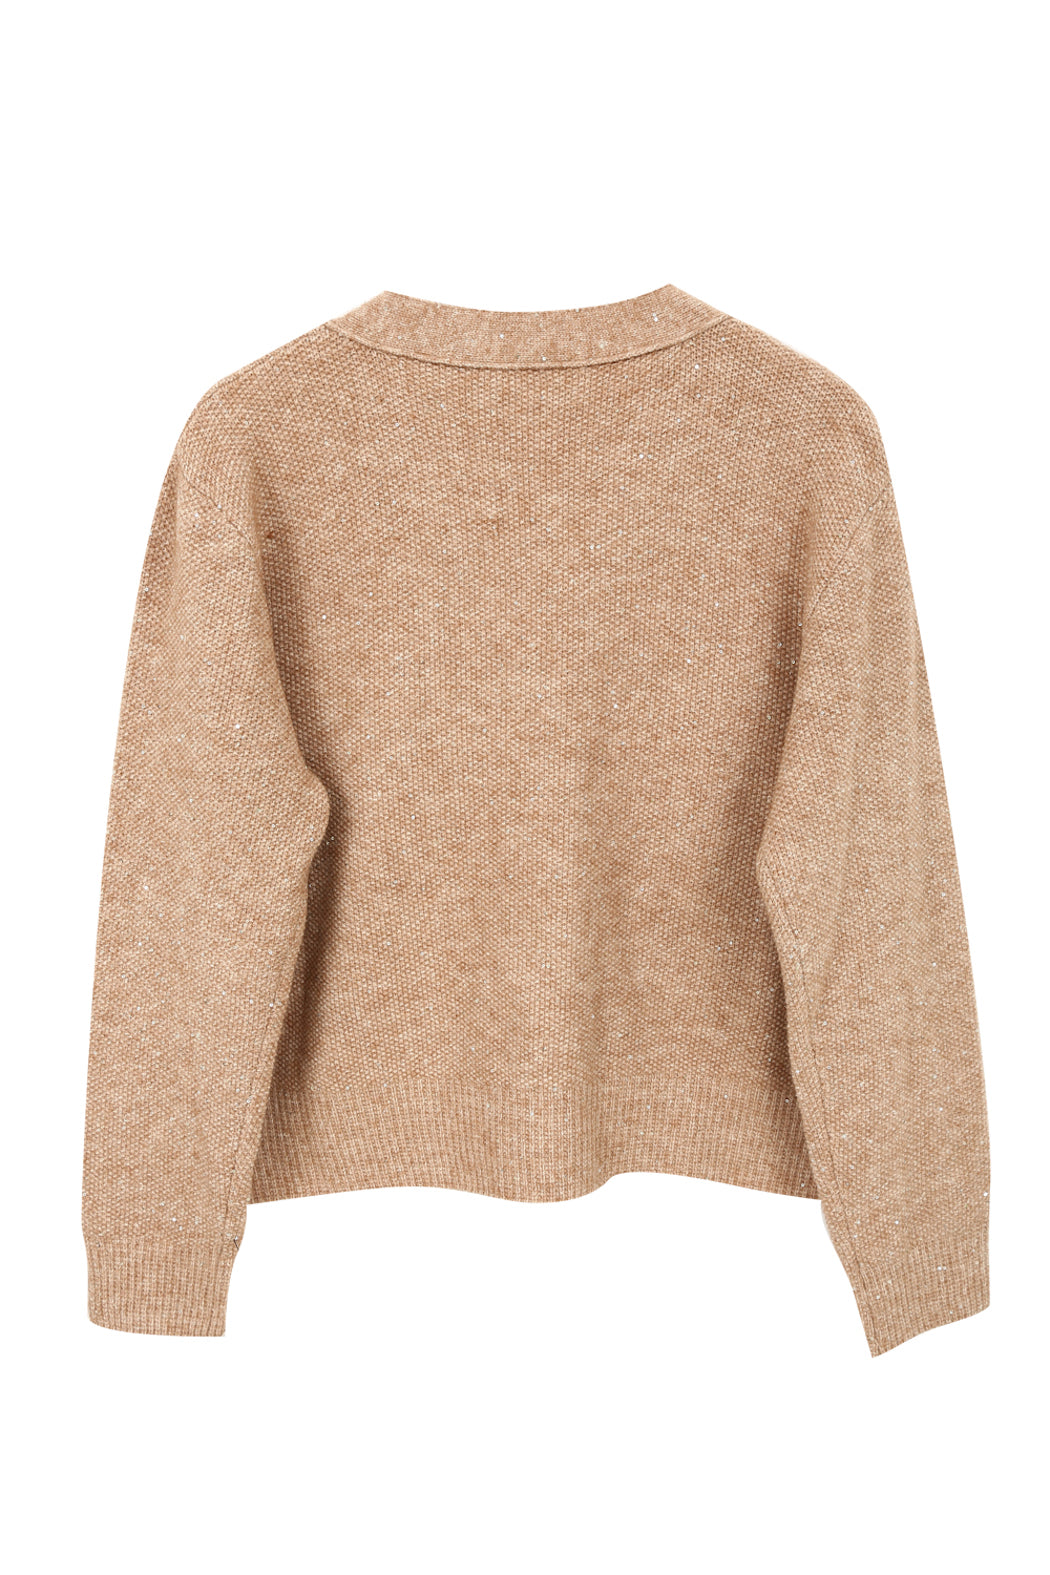 Sparkly Cardigan - Beige | The Korner - Clearance